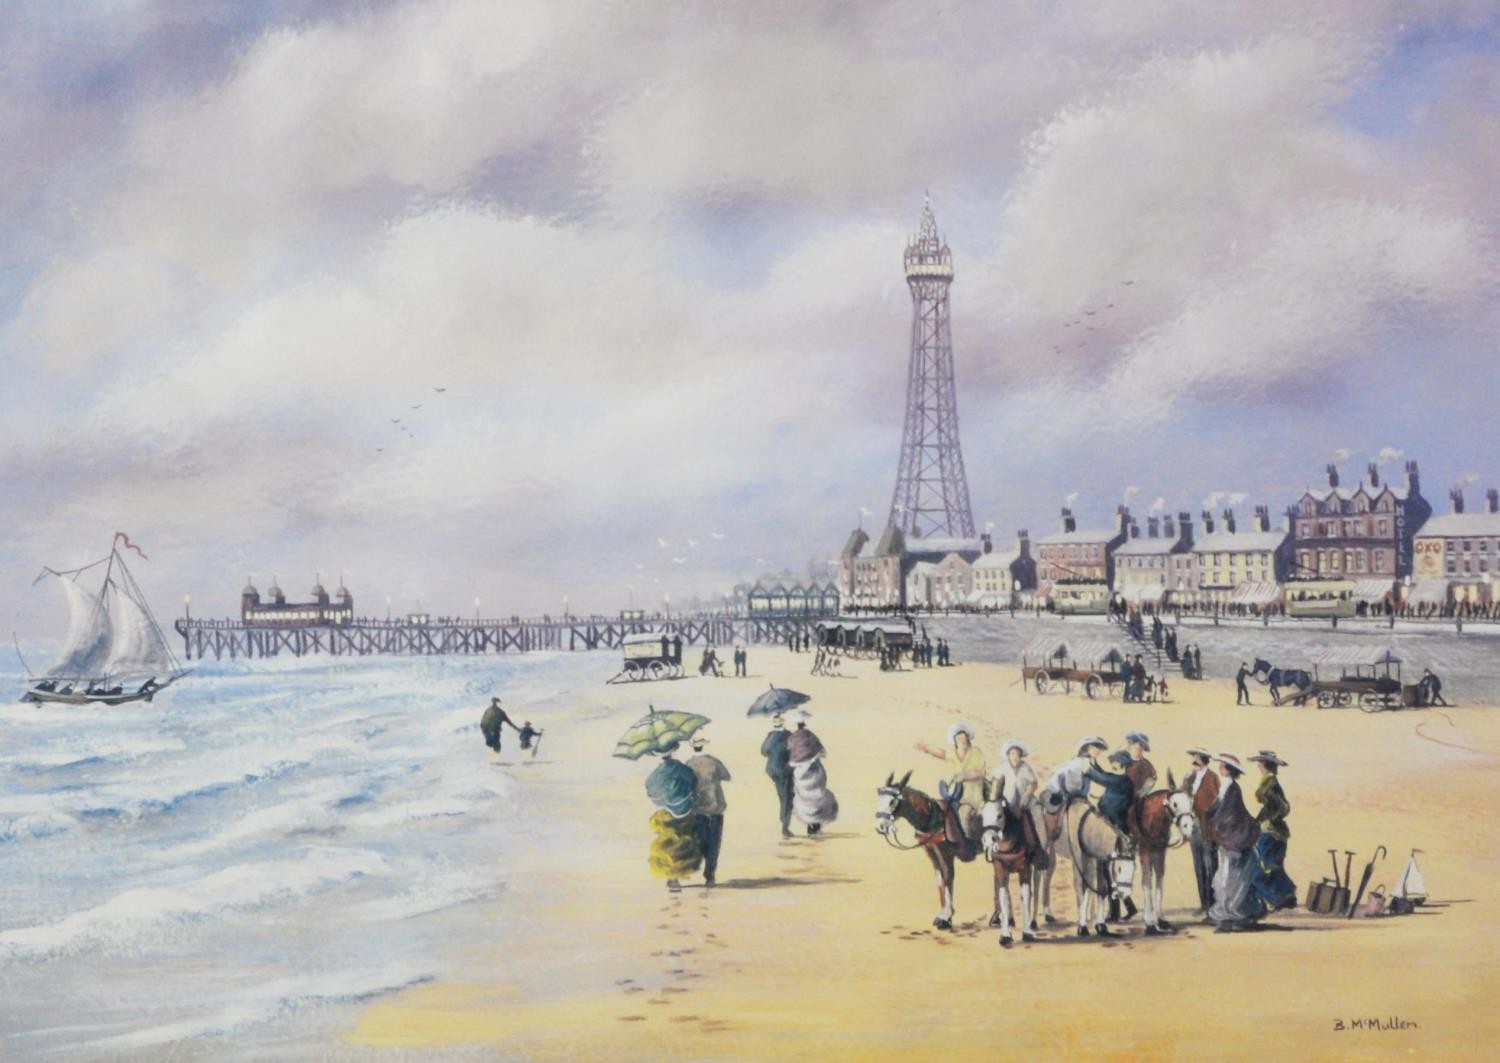 BERNARD MCMULLEN PAIR OF ARTIST SIGNED LIMITED EDITION COLOUR PRINTS ‘Blackpool’ (201/850) ‘After